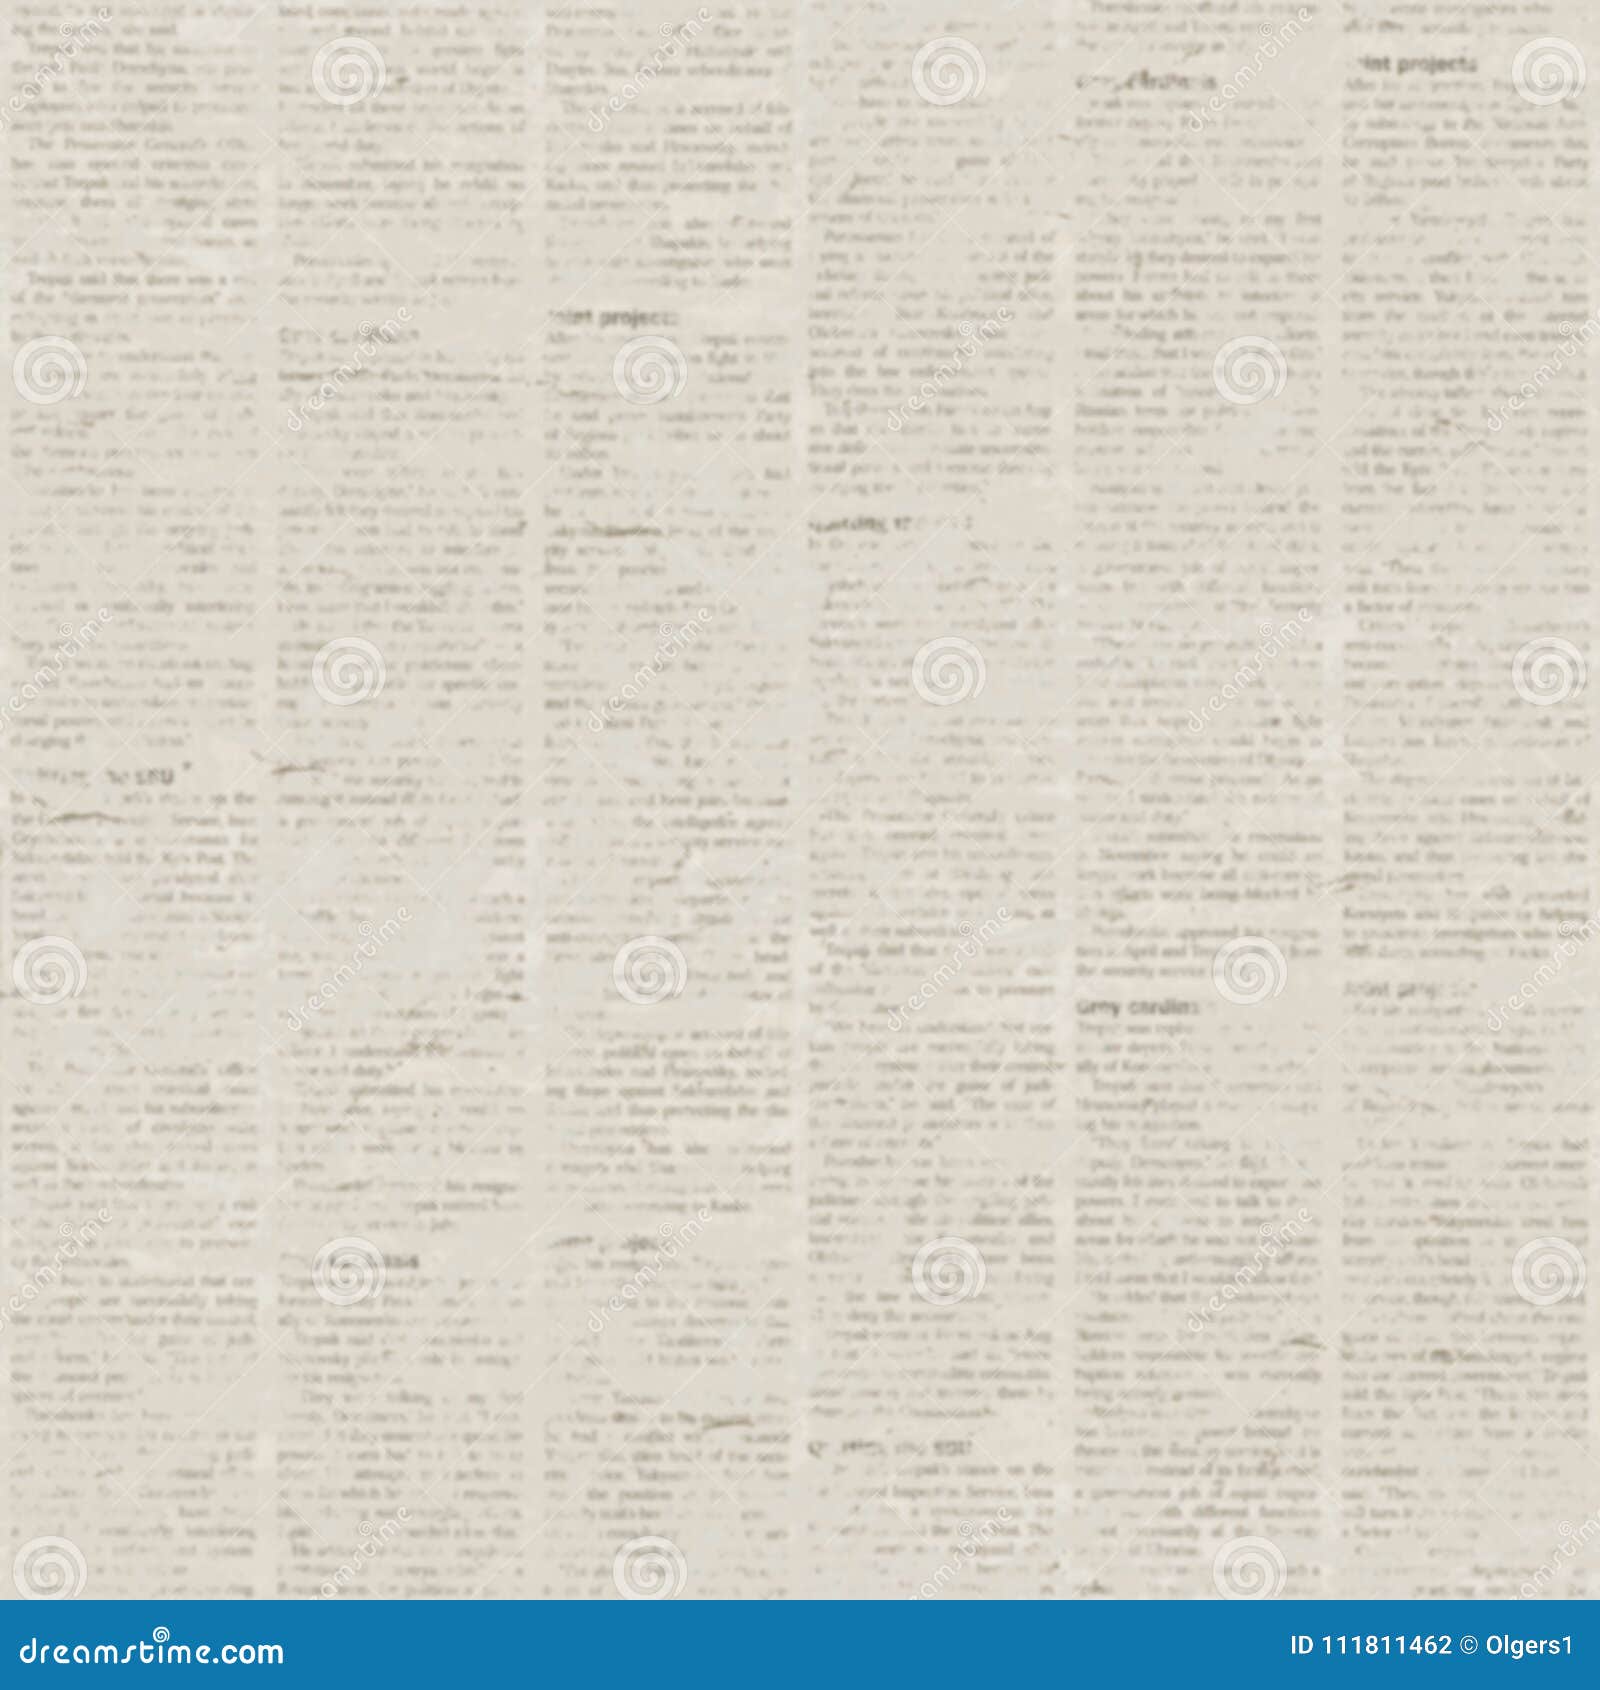 Old Newspaper Texture Background Stock Illustration Illustration Of Gray Aged